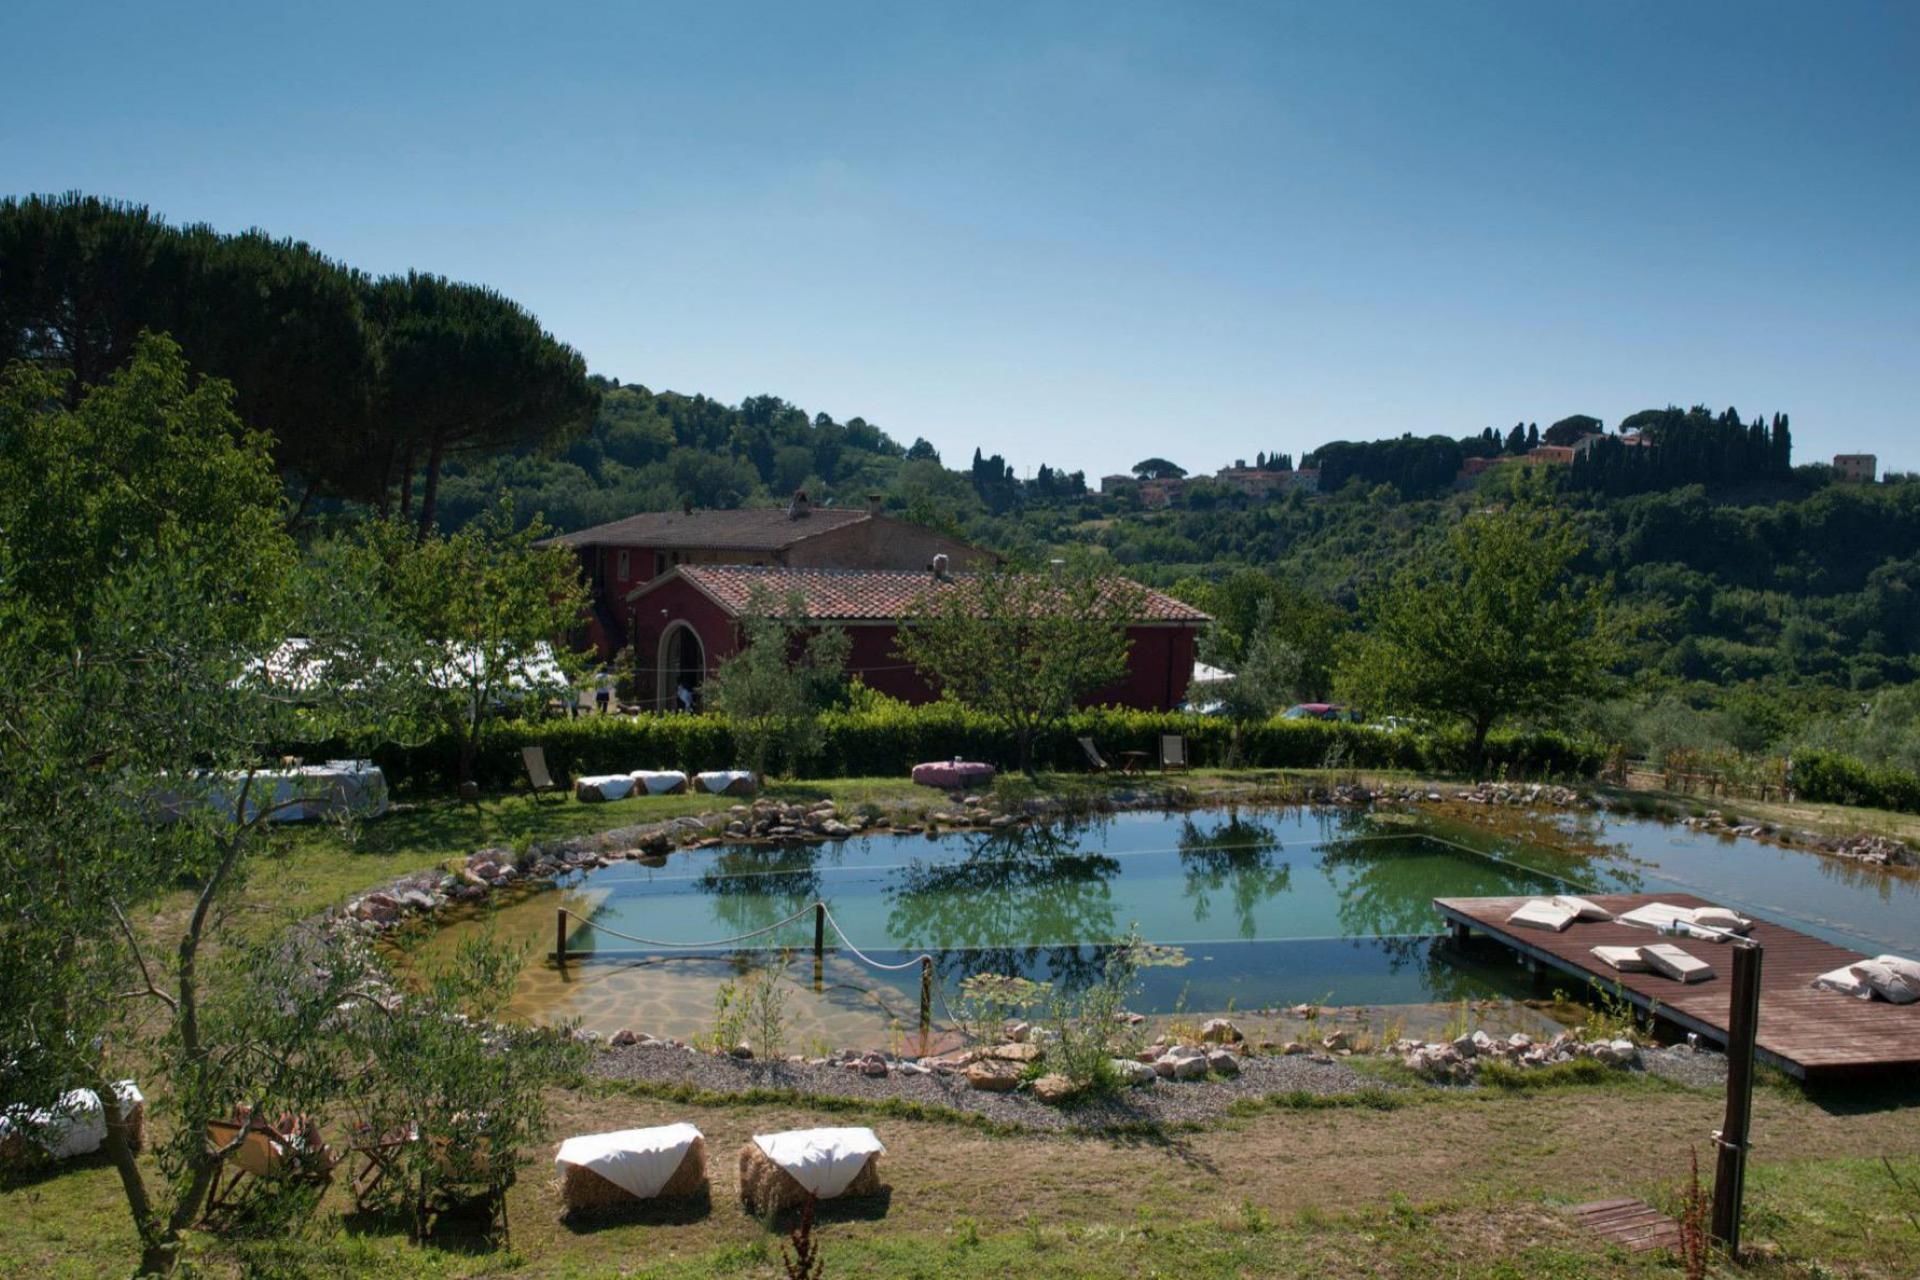 Agriturismo for nature lovers